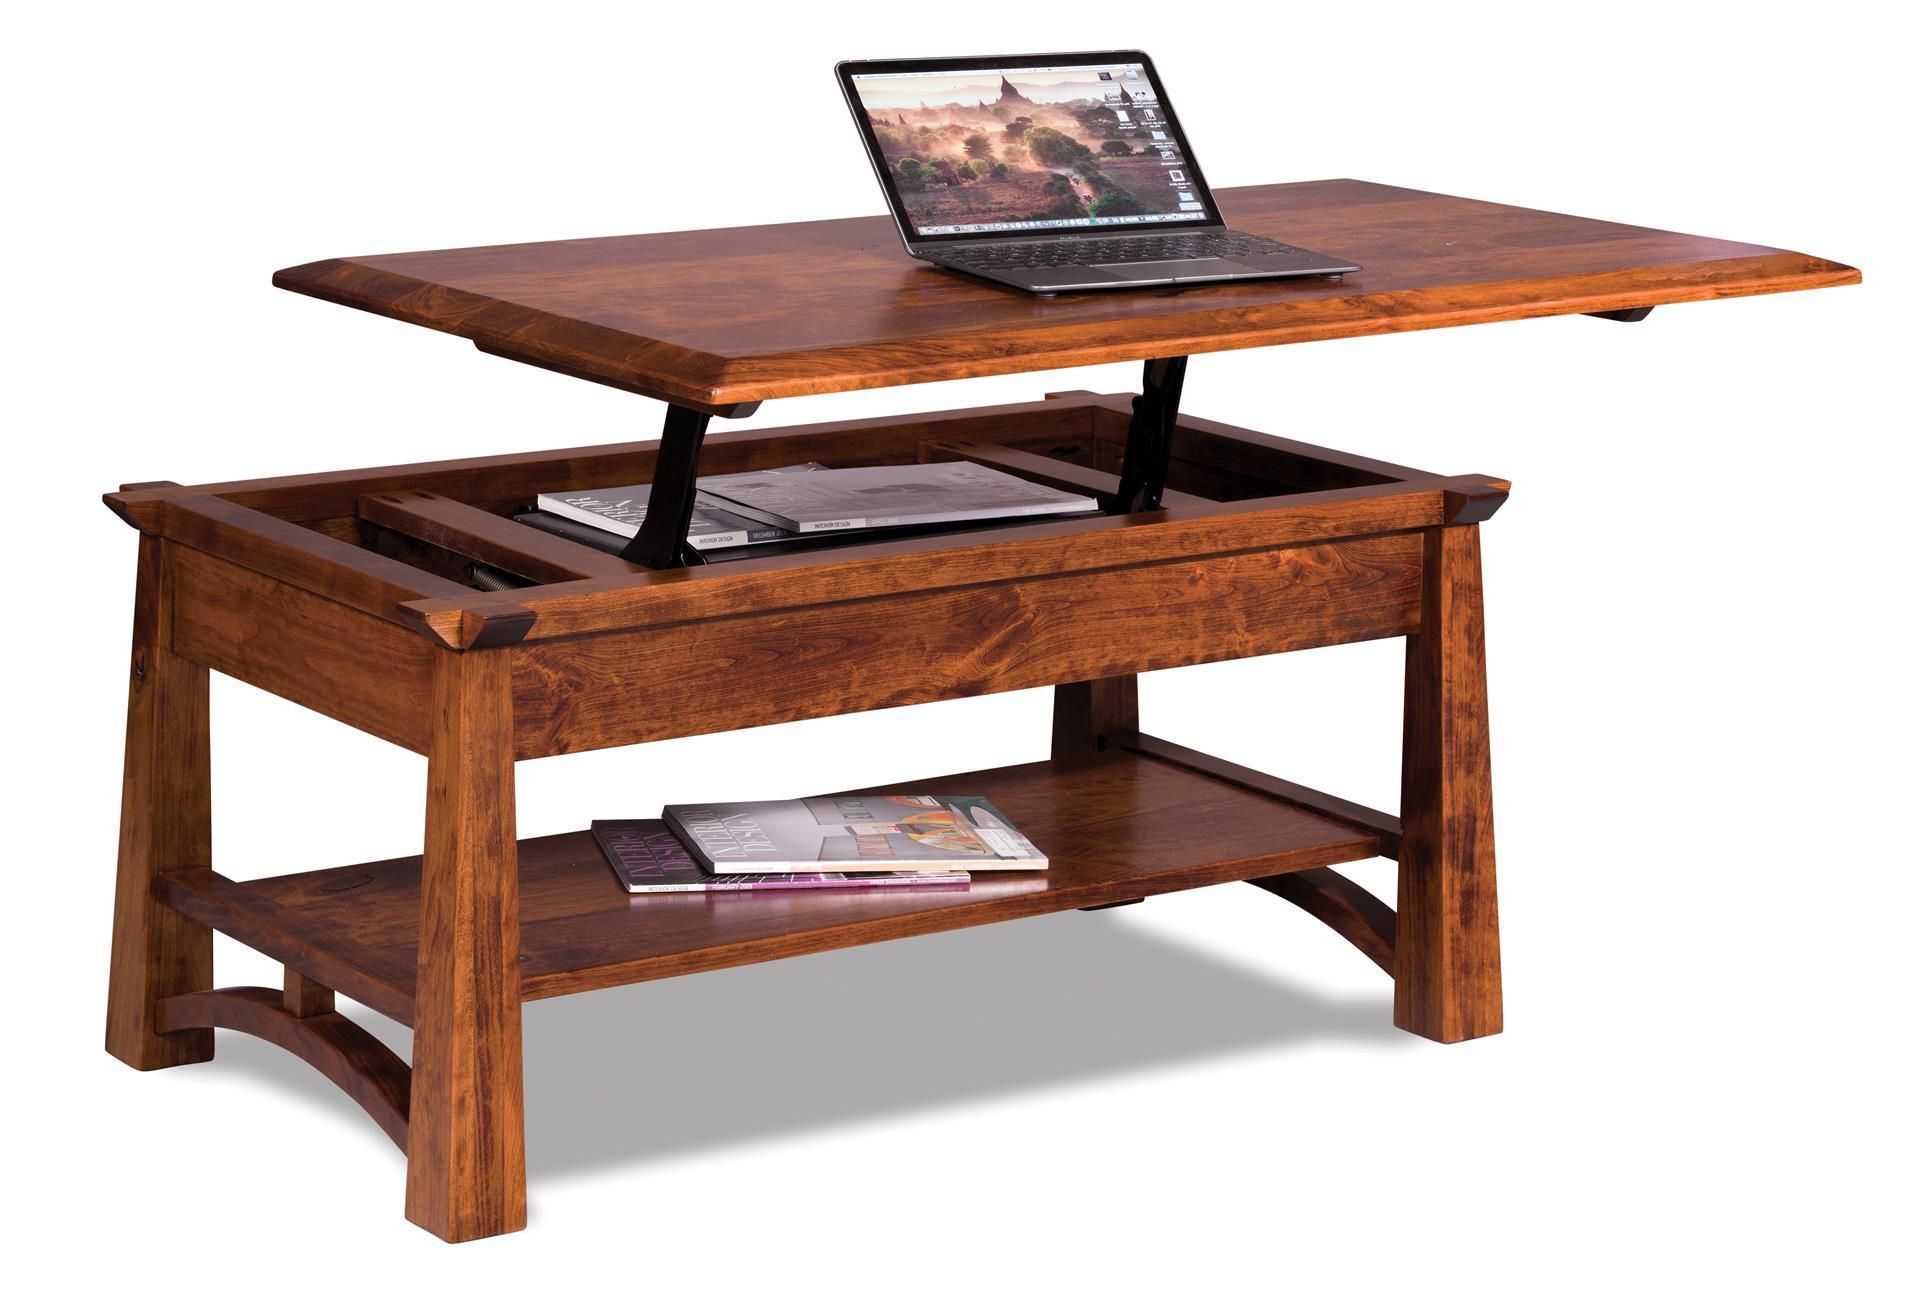 Rustic Cherry Wood Lift Top Coffee Table From Dutchcrafters Amish Throughout Wood Lift Top Coffee Tables (View 9 of 15)